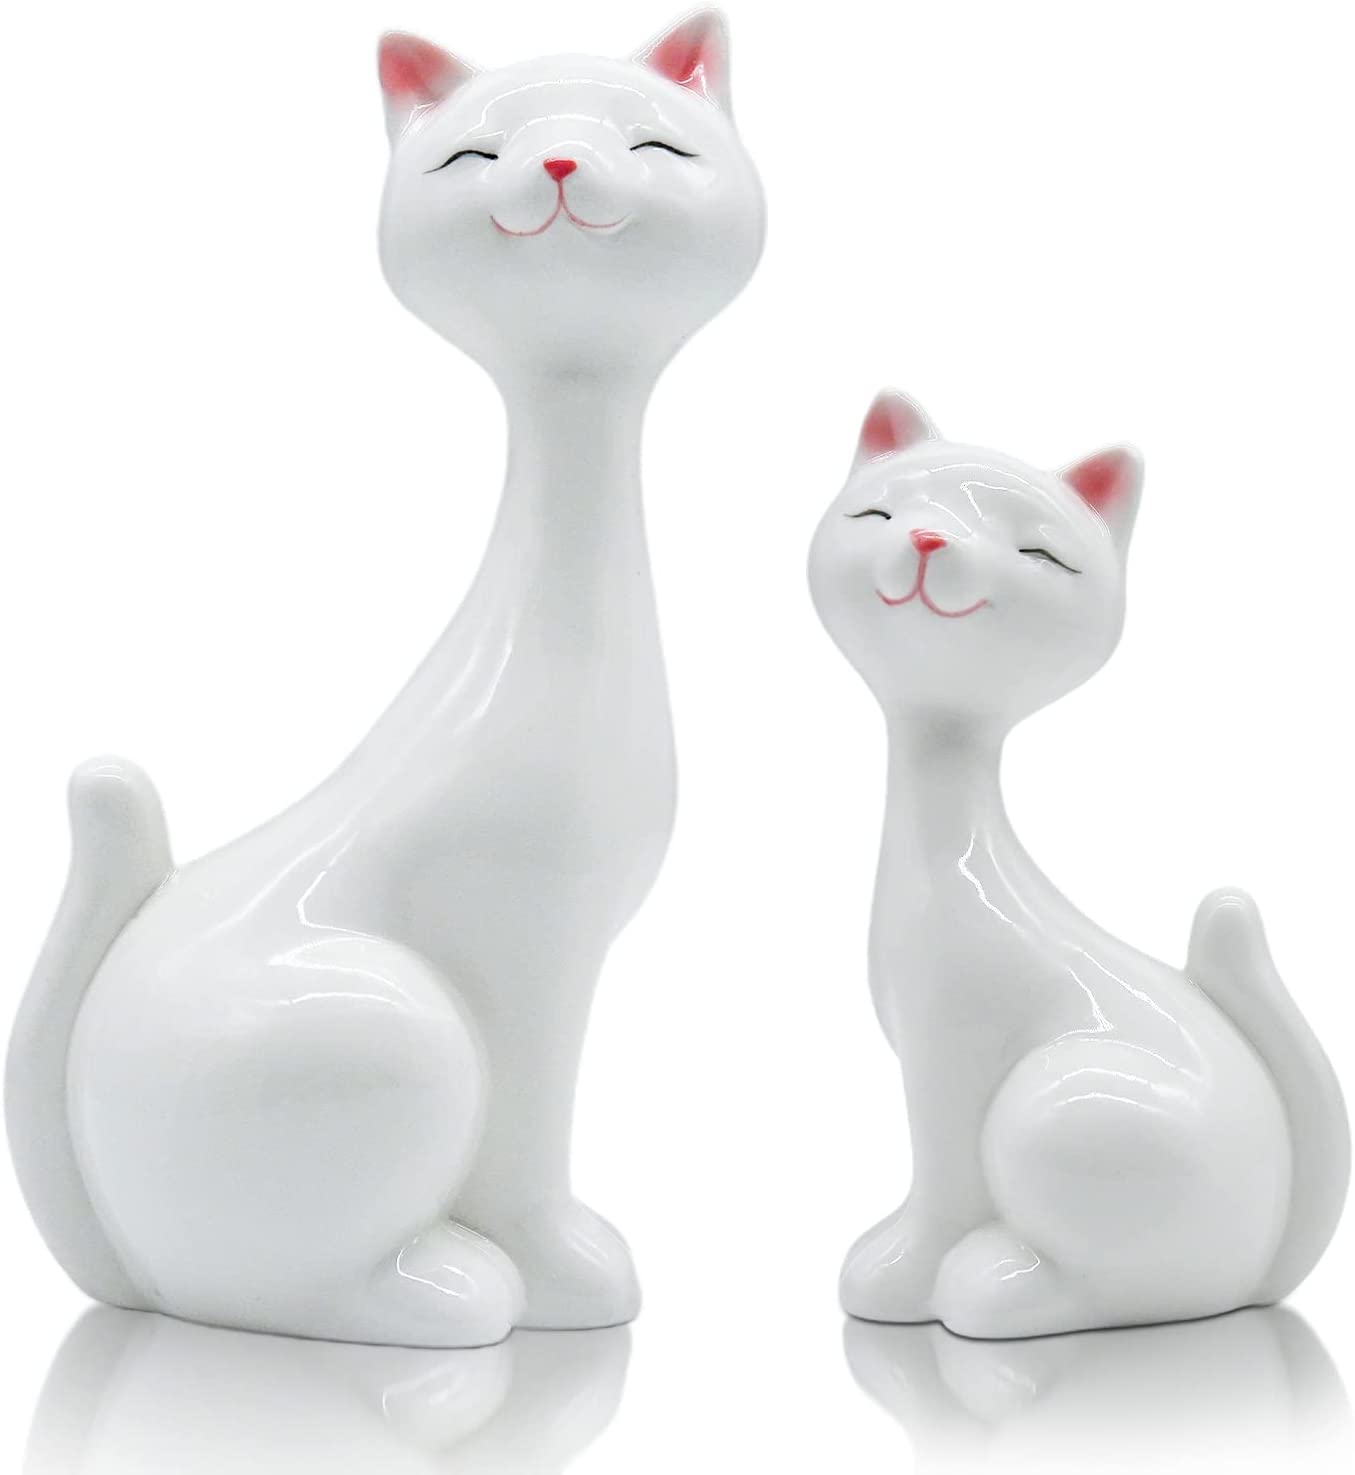 2 PCS White Ceramic Cat Figurines with LED Light, Cute Kitten Statue Home Decor, Cat Decor for Cat Lovers, Desktop Decorations for Cat Lovers, Birthday Gifts